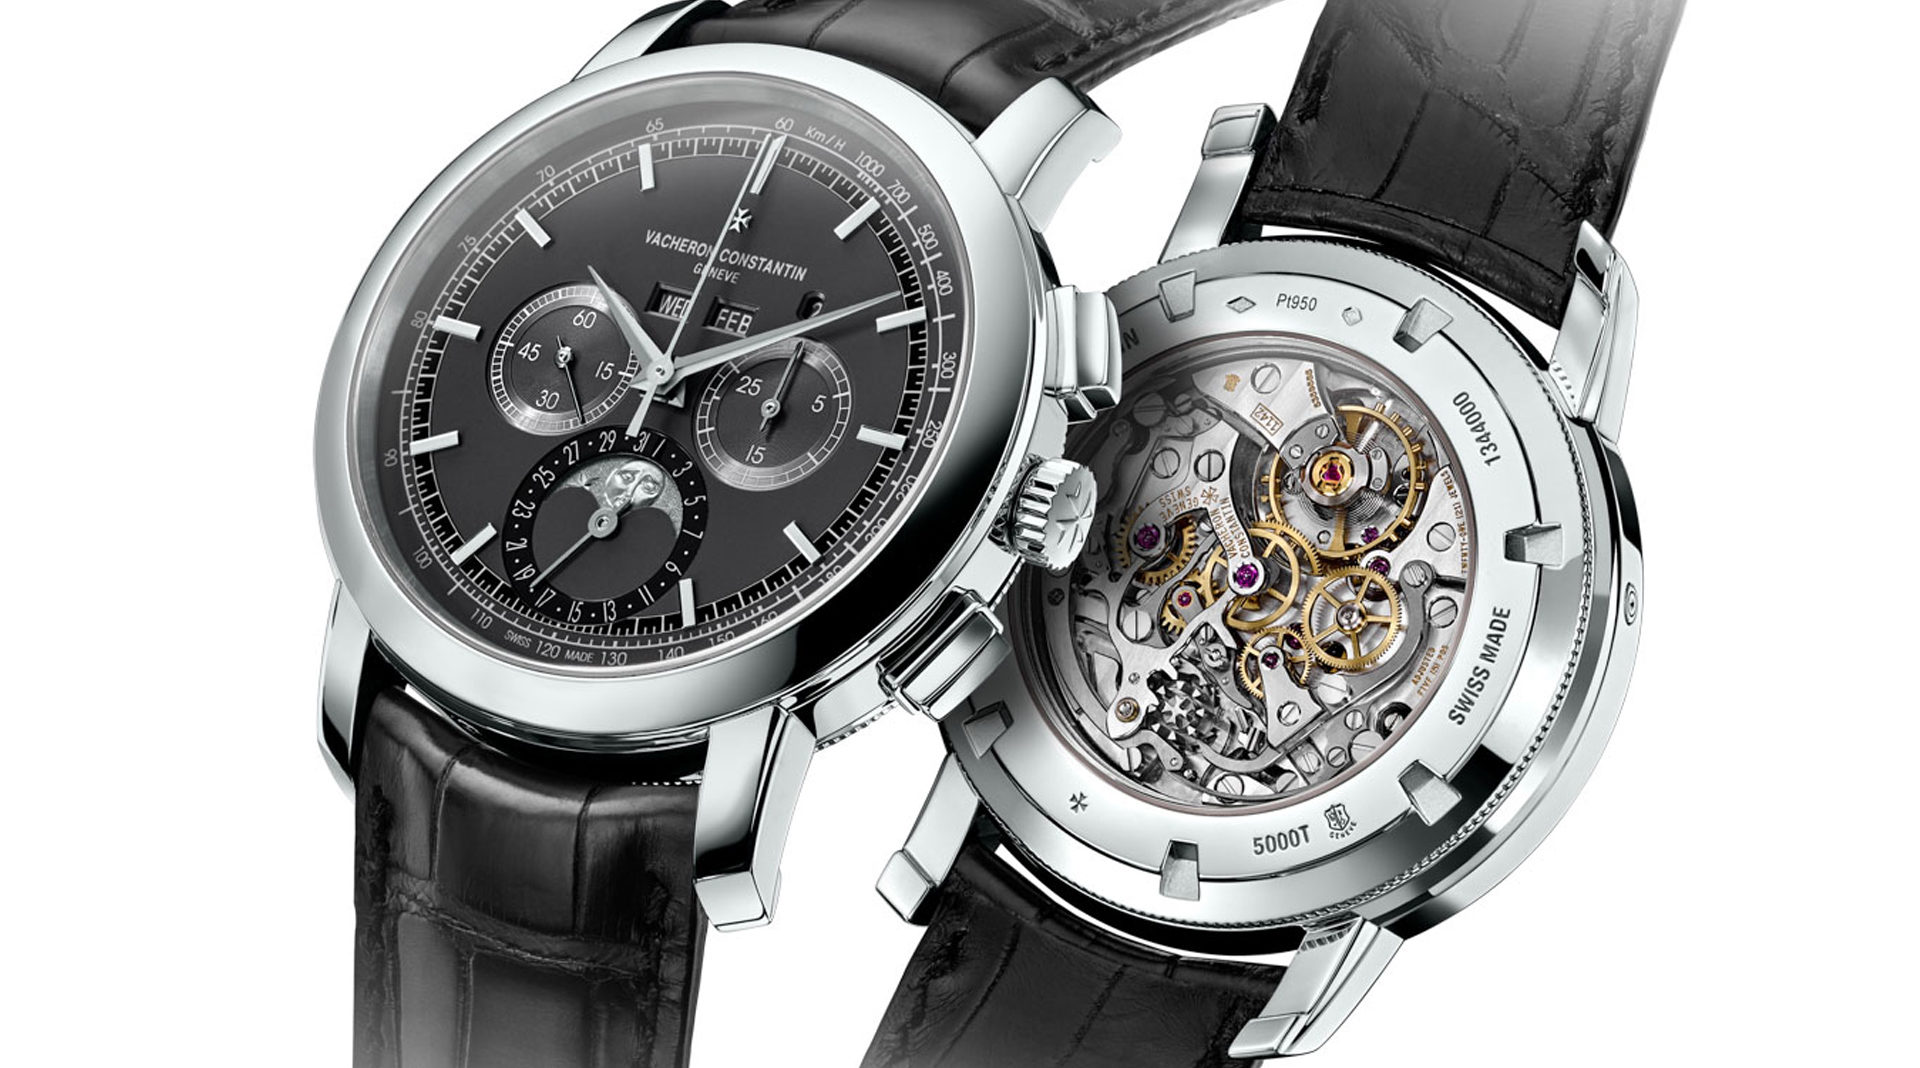 Vacheron Constantin Traditionnelle Chronograph Perpetual Calendar front and back